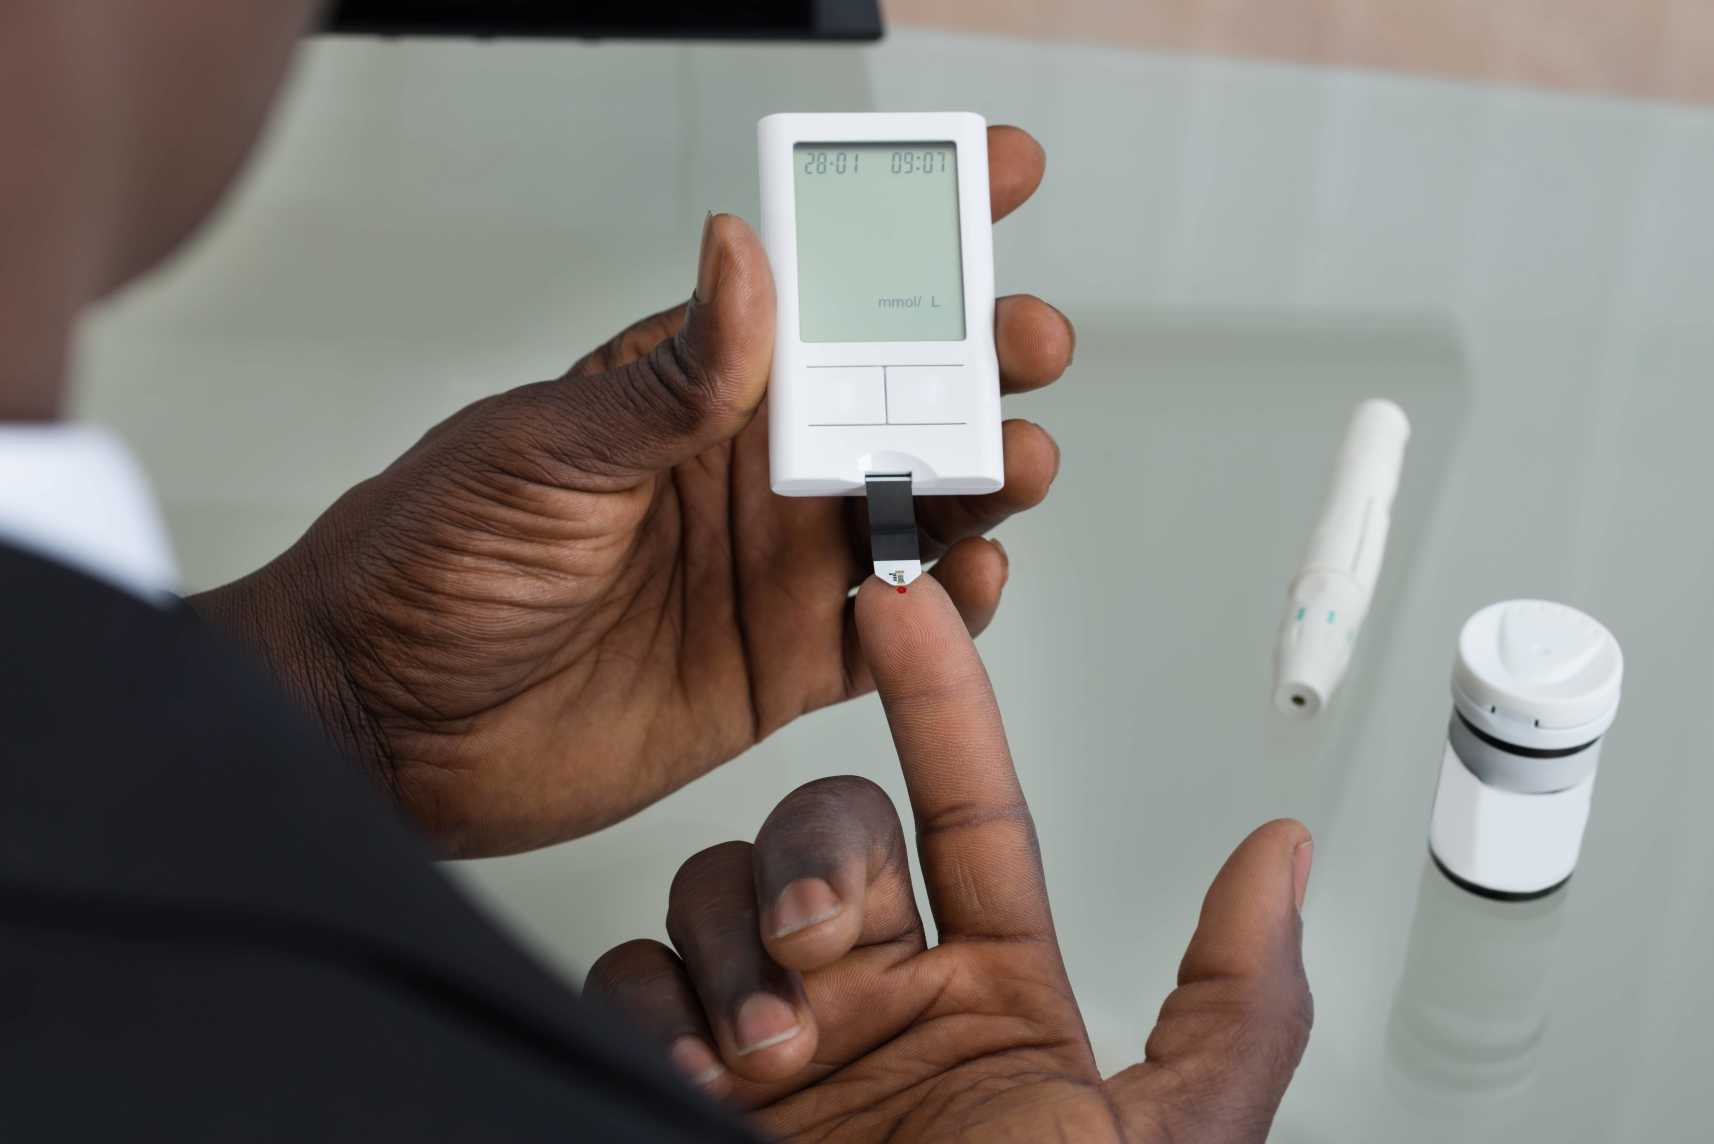 Man with diabetes using glucometer